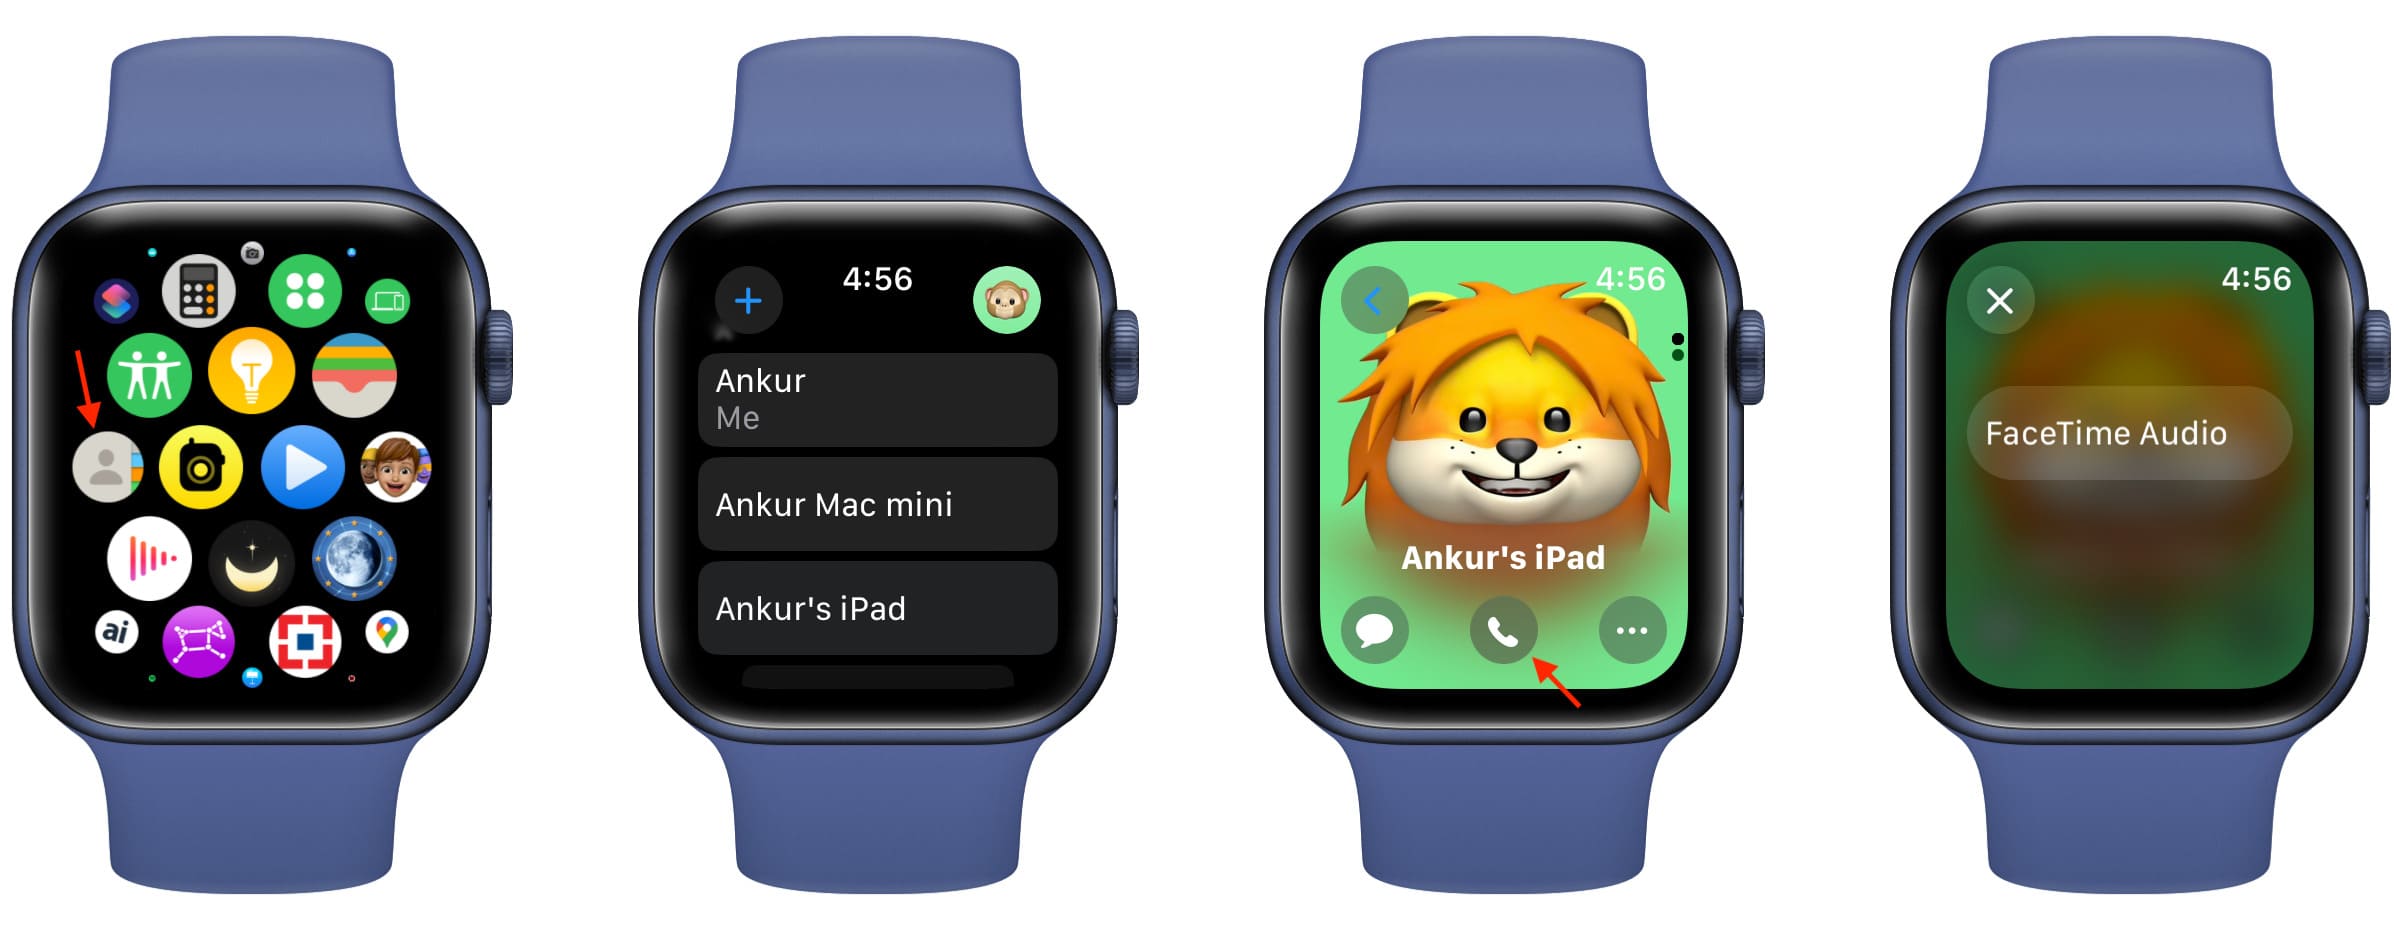 Make FaceTime audio call from Apple Watch Contacts app